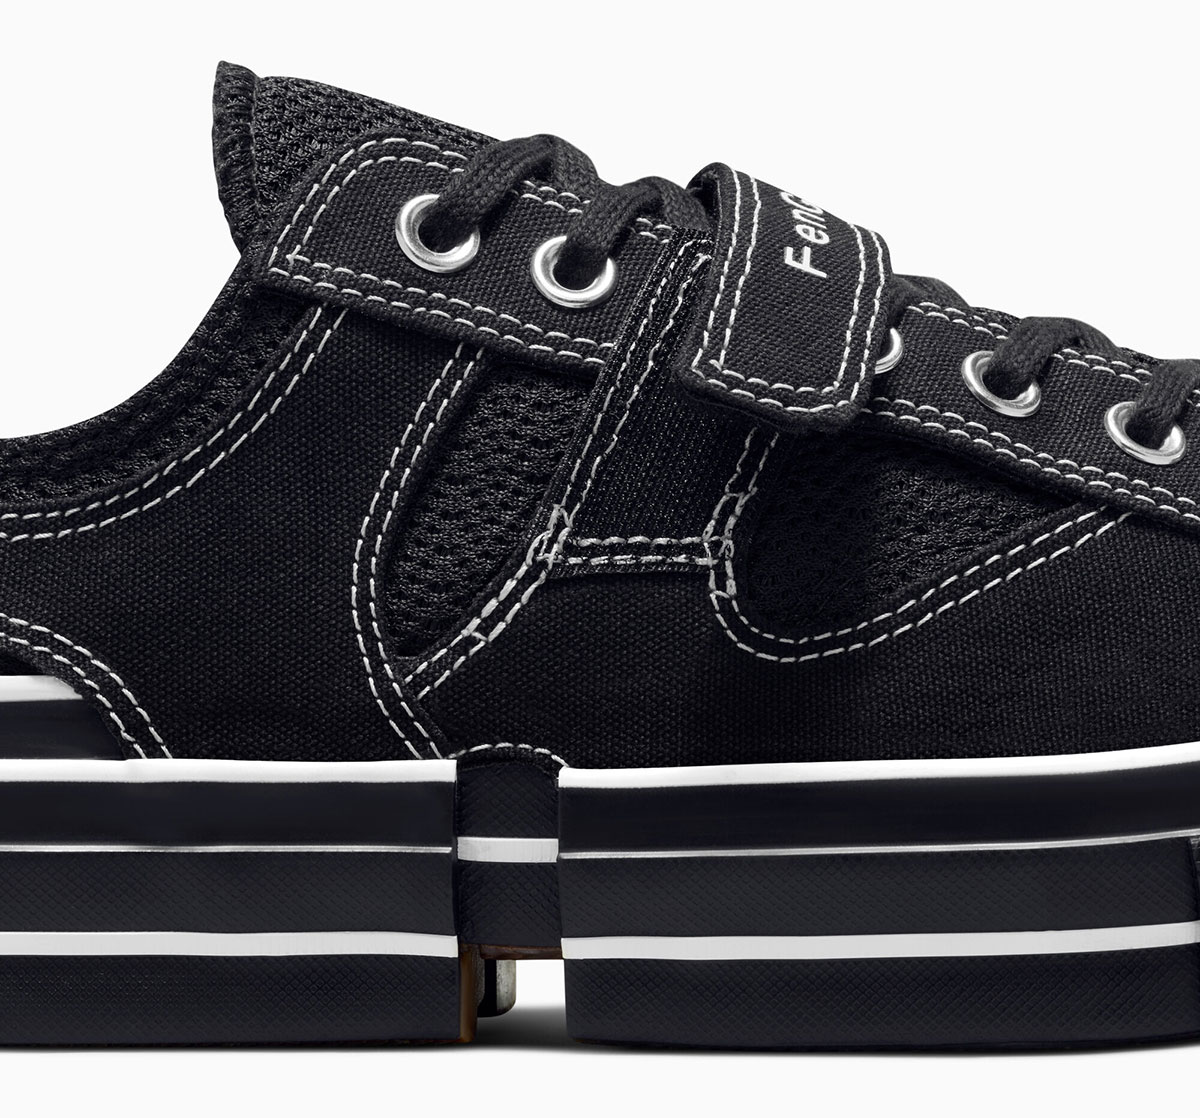 Feng Chen Wang x Converse lace-up sneakers A08858c 8